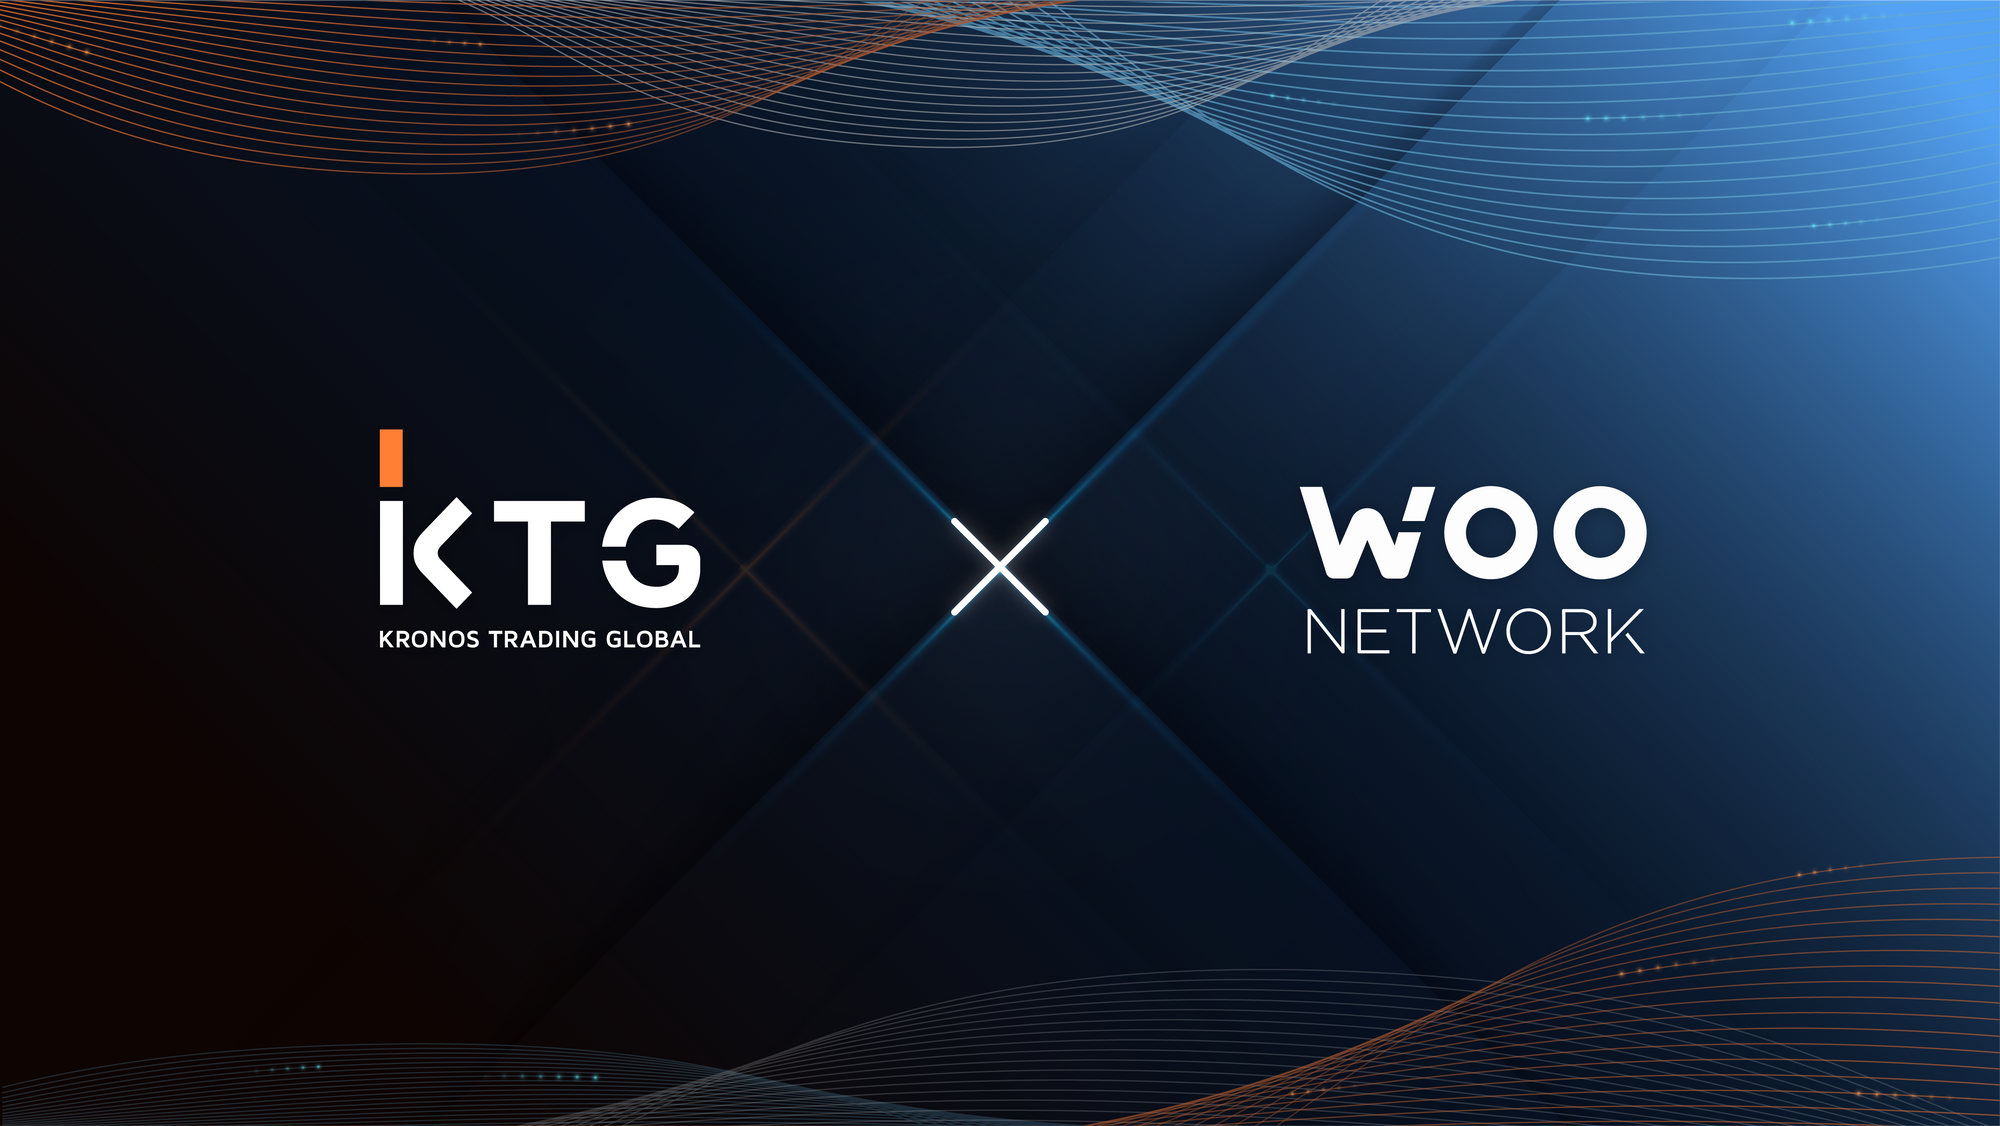 WOO Network partners with KTG to maximize traders’ performance